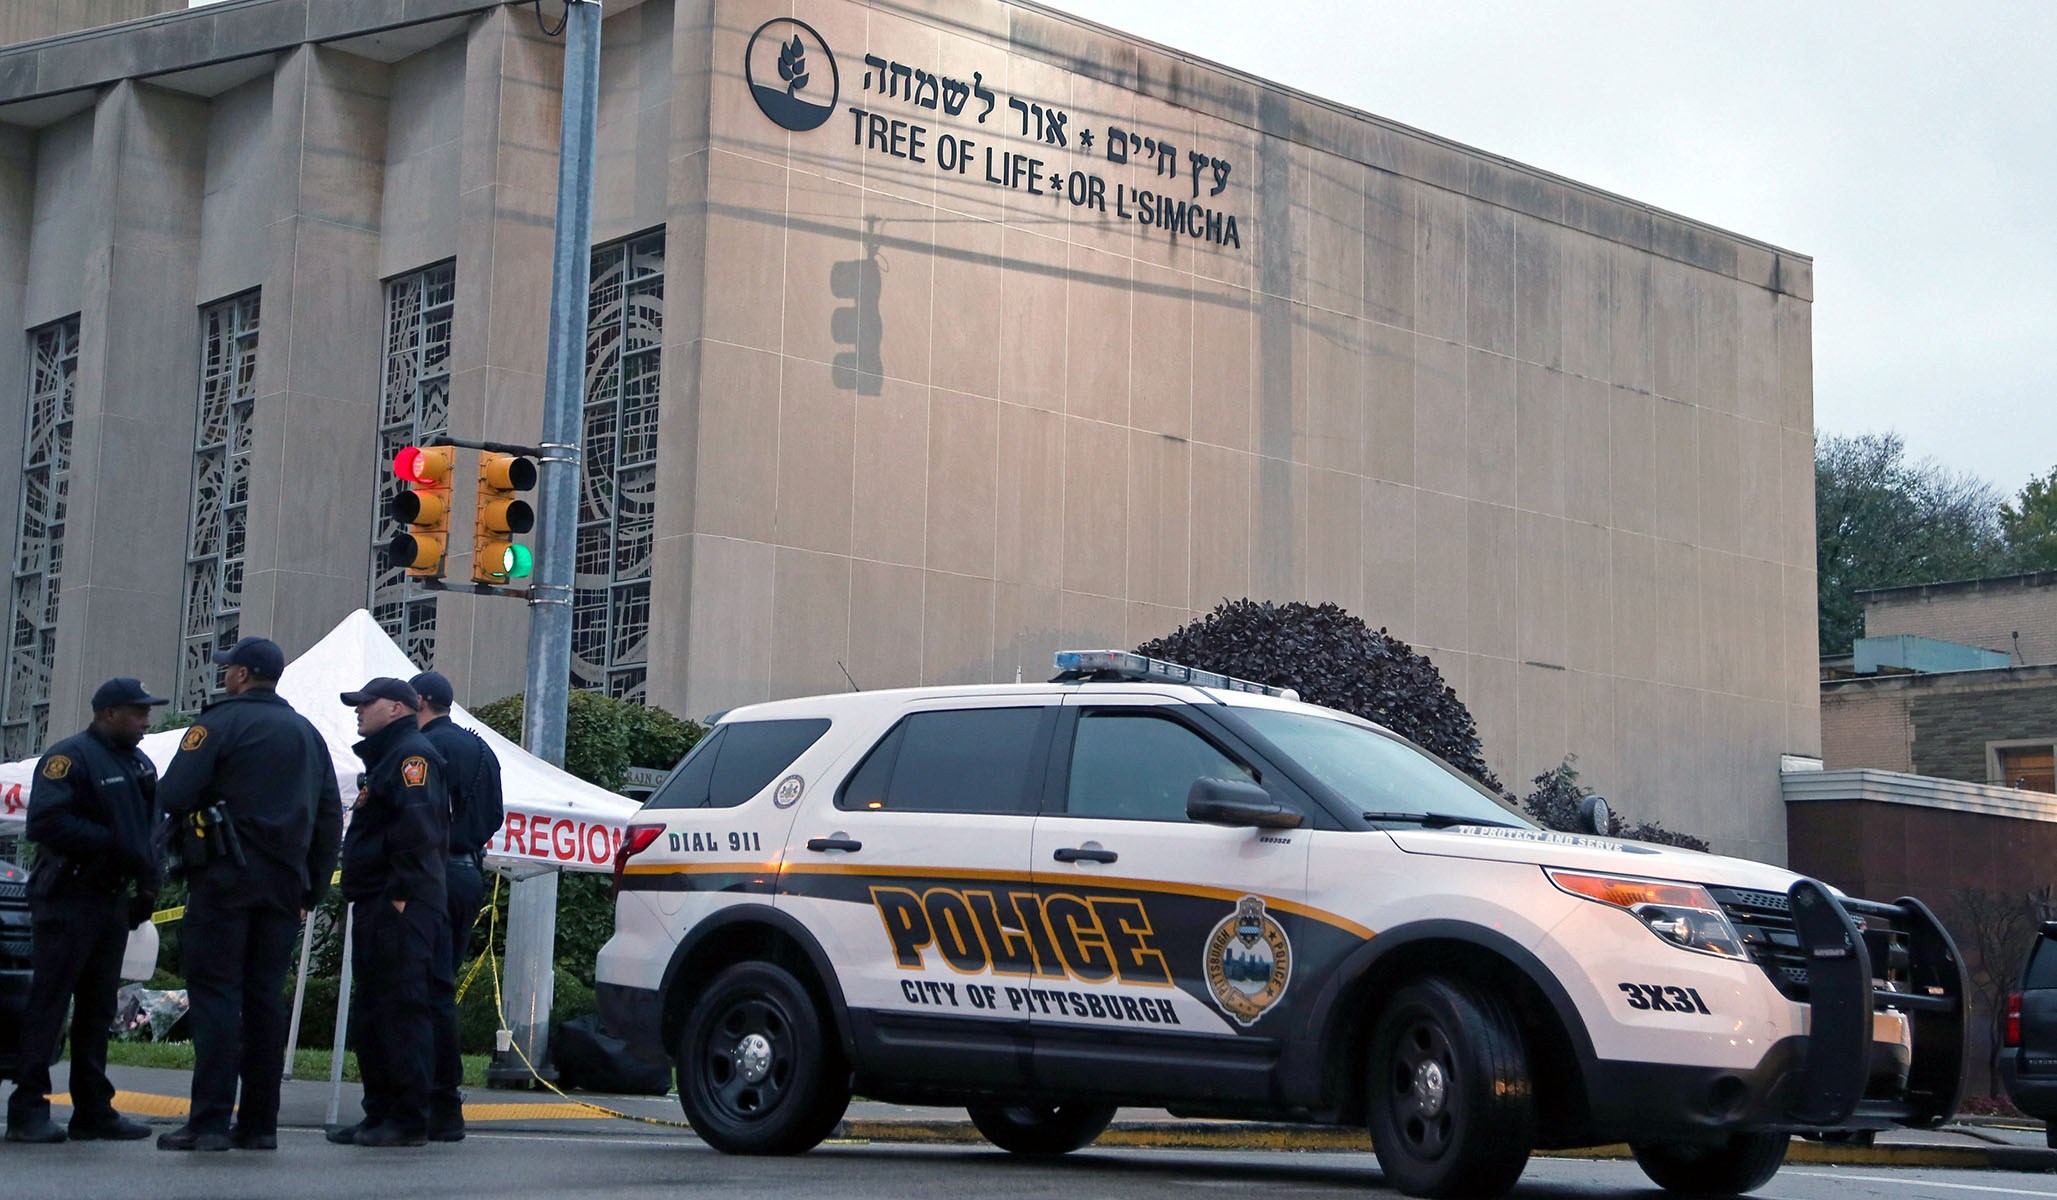 Police officers guard the Tree of Life synagogue